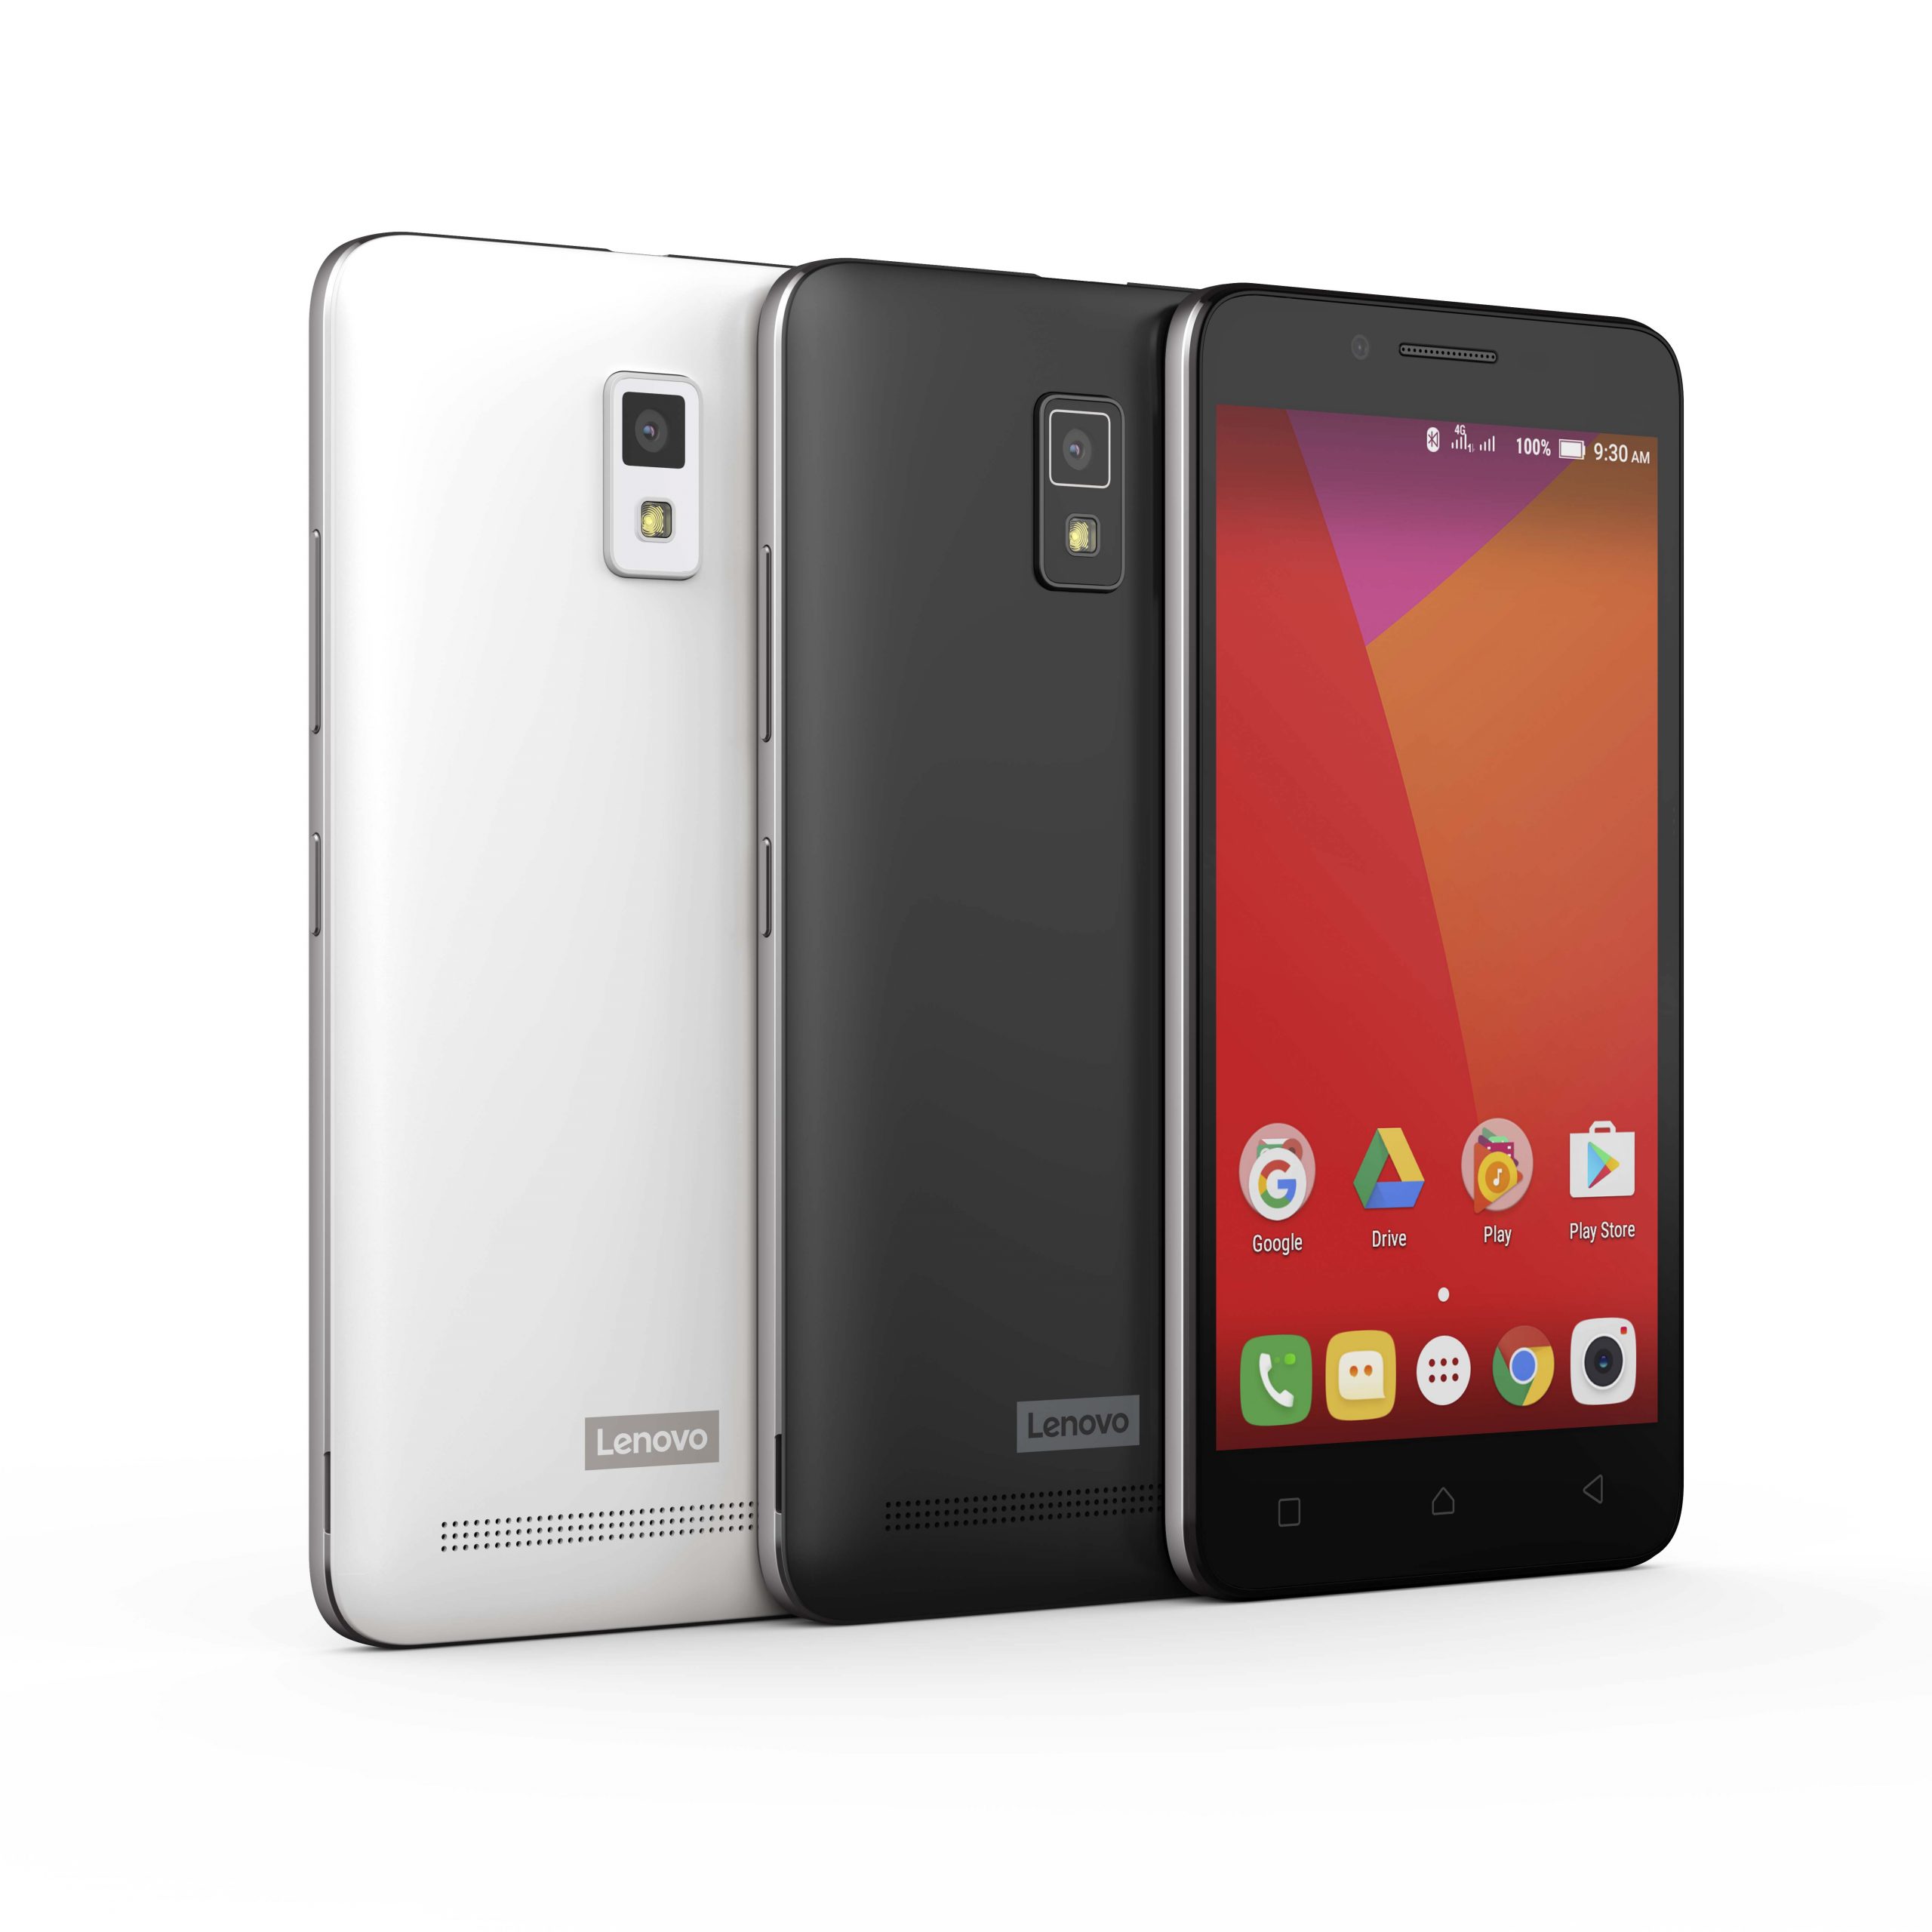 Lenovo VIBE A6600 Now FREE in Globe’s MyLifestyle Plan 599